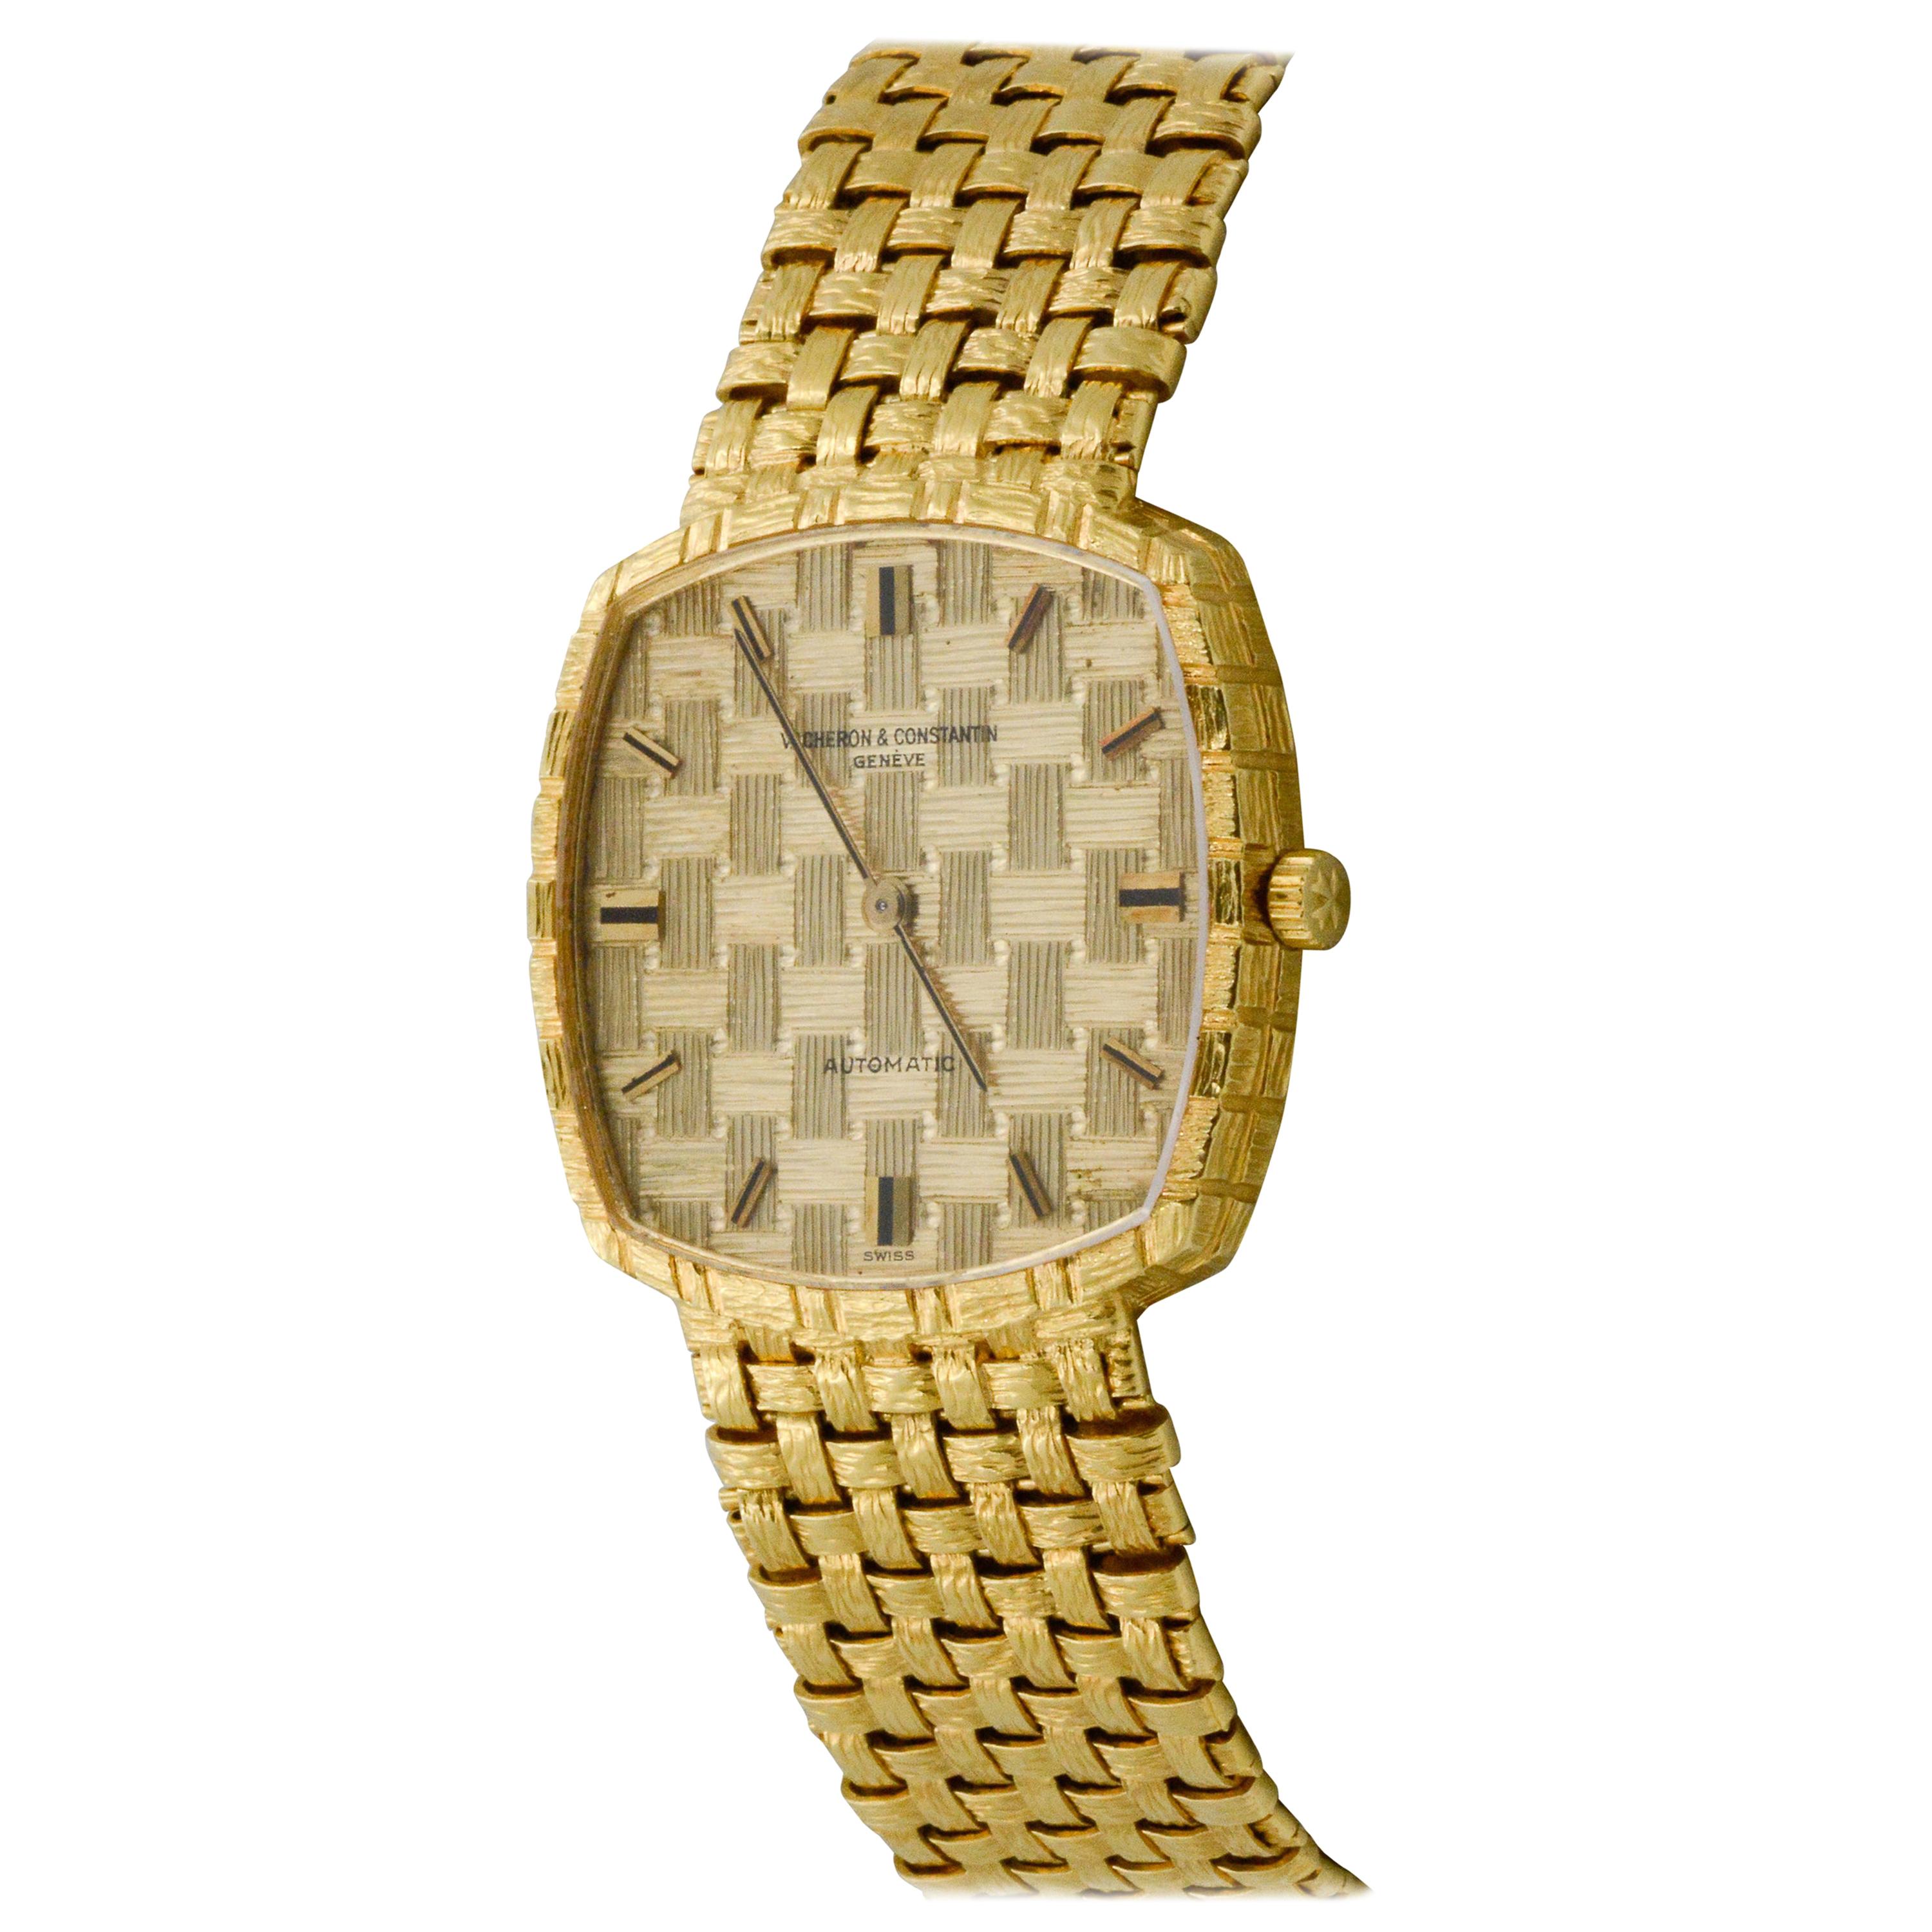 From Vacheron Constantin, this 1970s 18 karat yellow gold watch has a unique square case with a basket weave pattern index dial. The watch also has a textured basket weave bracelet and automatic movement. 